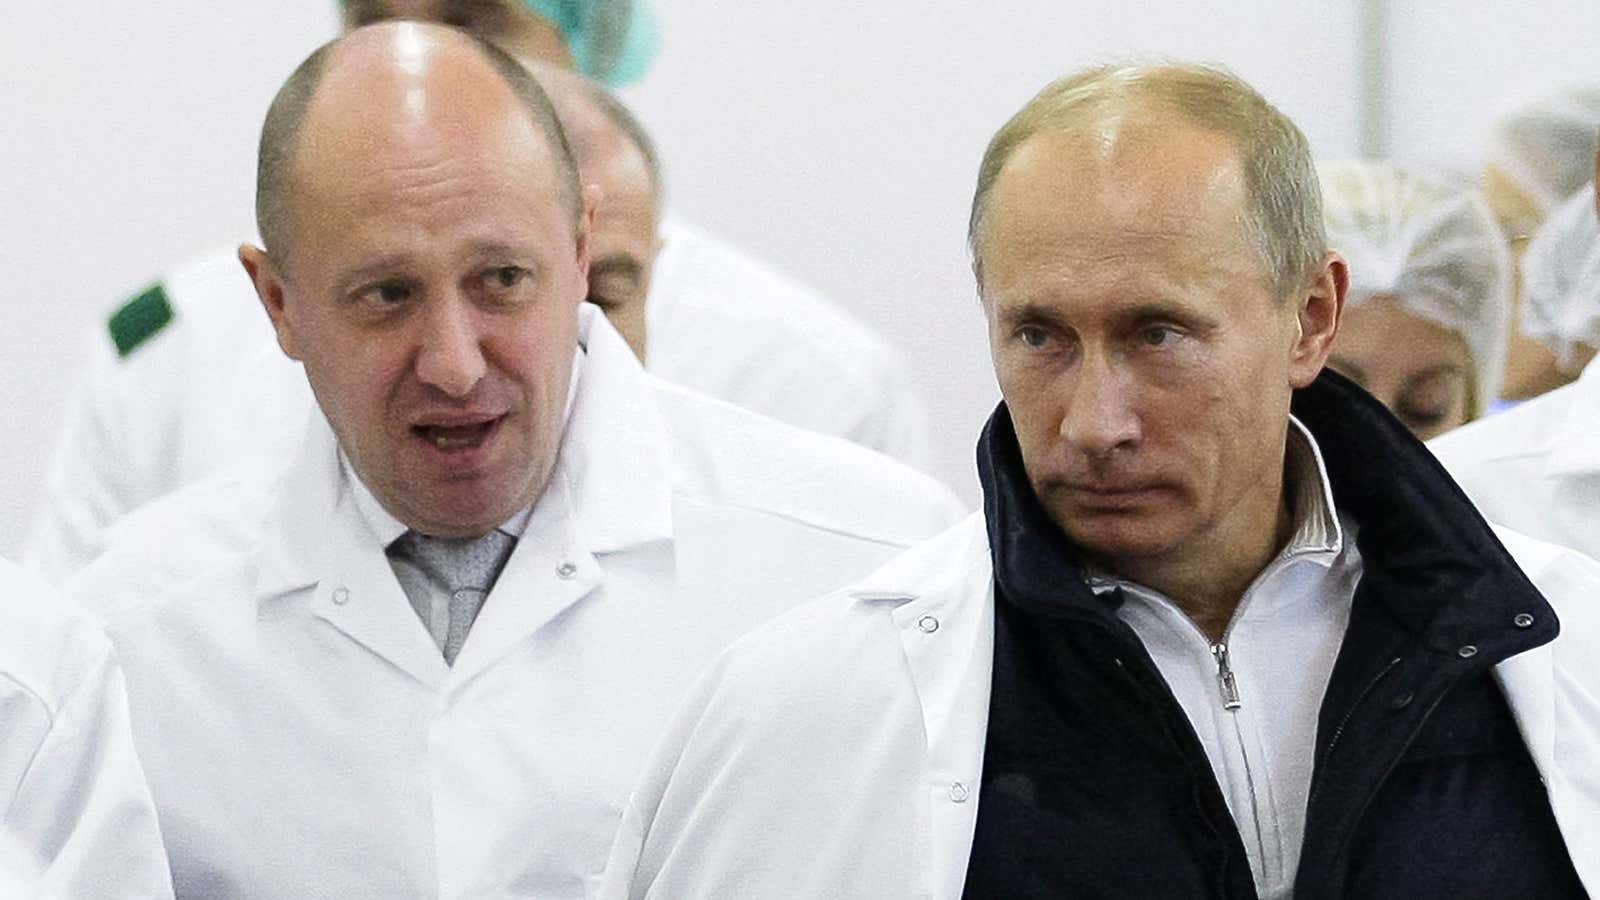 Oligarch Yevgeny Prigozhin ordered poisonings, attacks, and a murder.